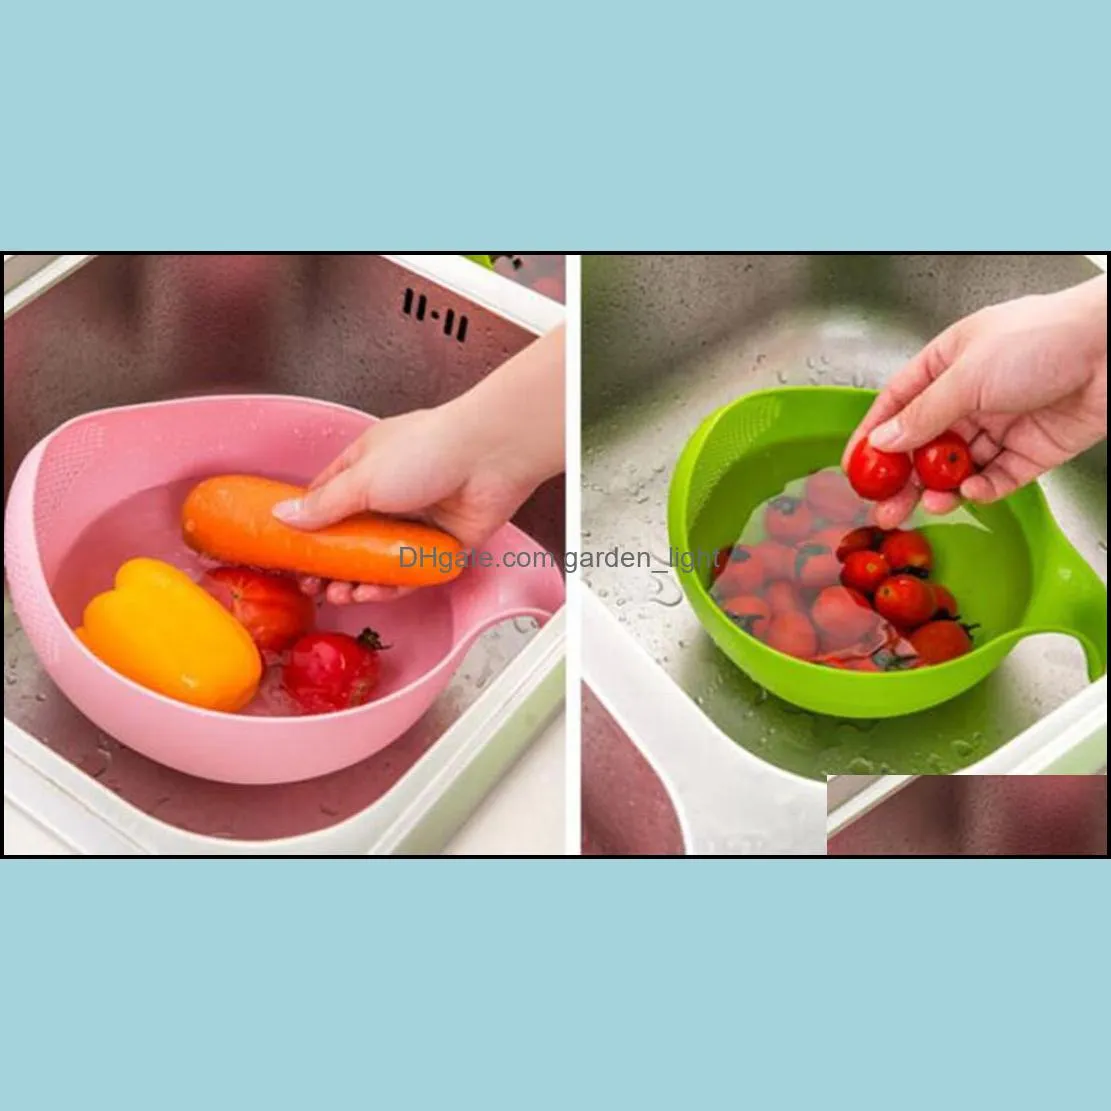 rice washing filter strainer tools creative plastic beans peas cleaning gadget useful convenient kitchen tool lxl1103